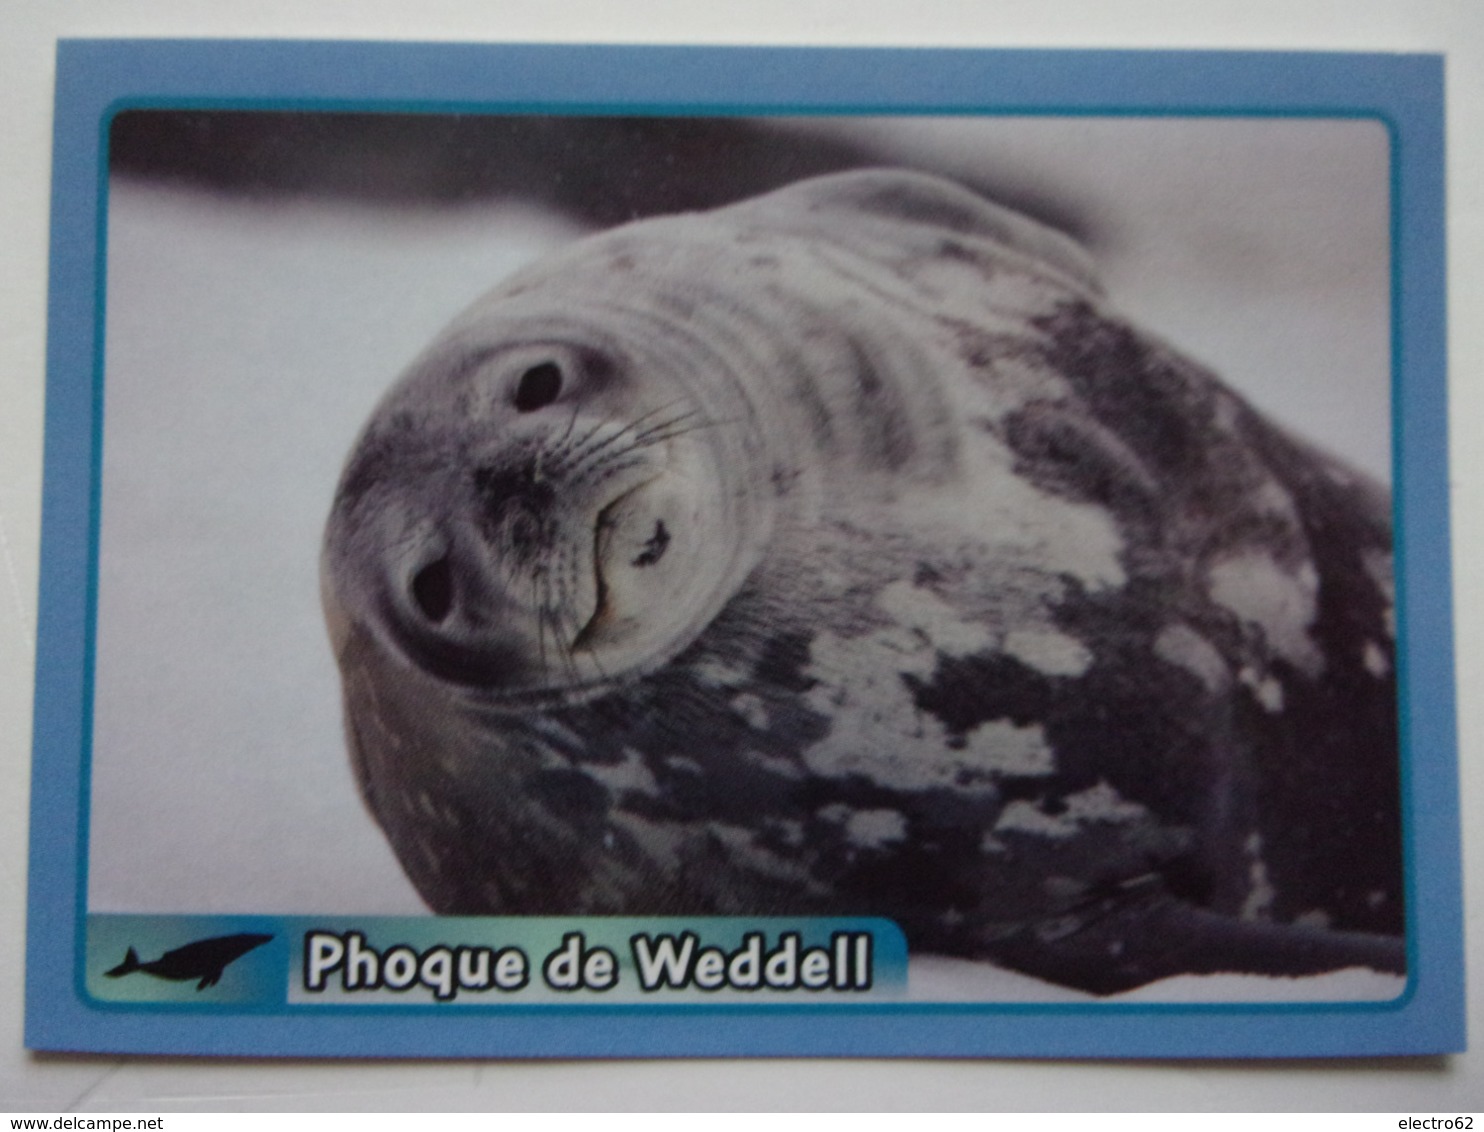 French edition - PANINI ANIMAL WORLD animaux N°288 phoque de Weddell sello  dichtung Weddell seal